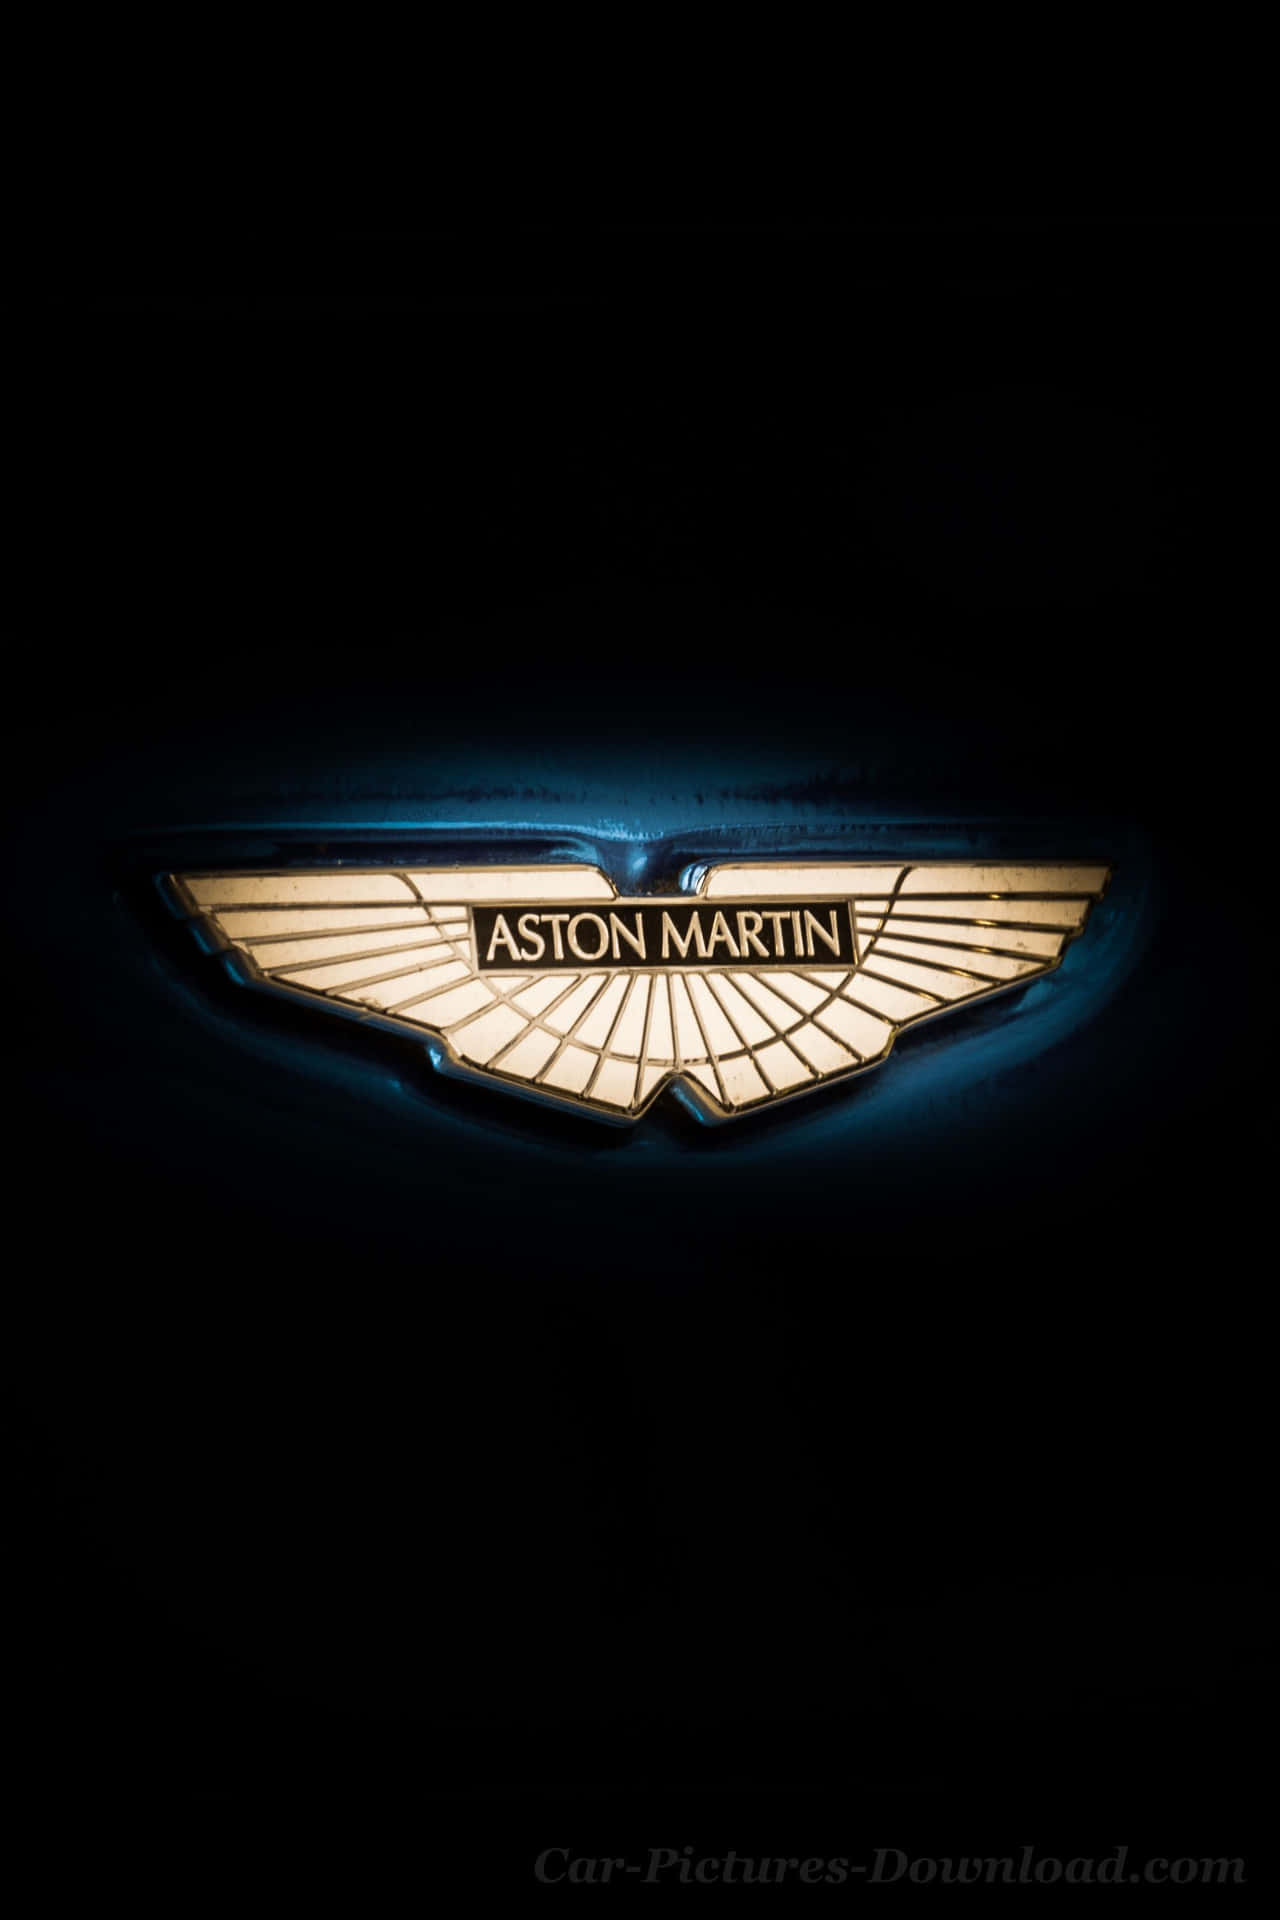 The Iconic Design of an Aston Martin